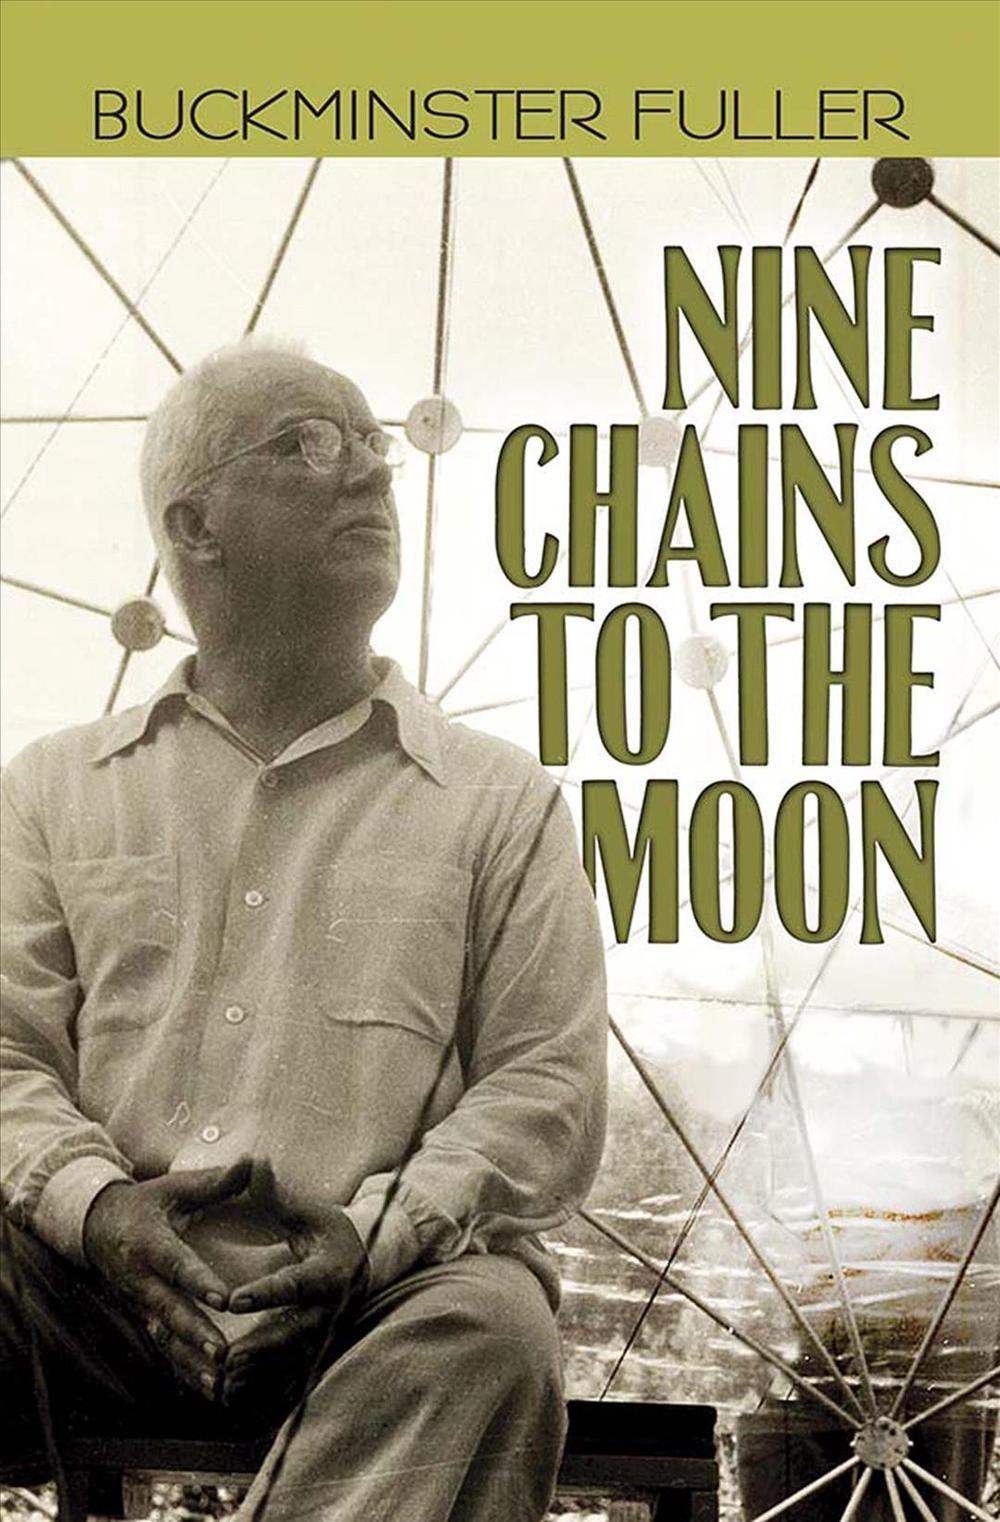 FULLER: NINE CHAINS TO THE MOON. 